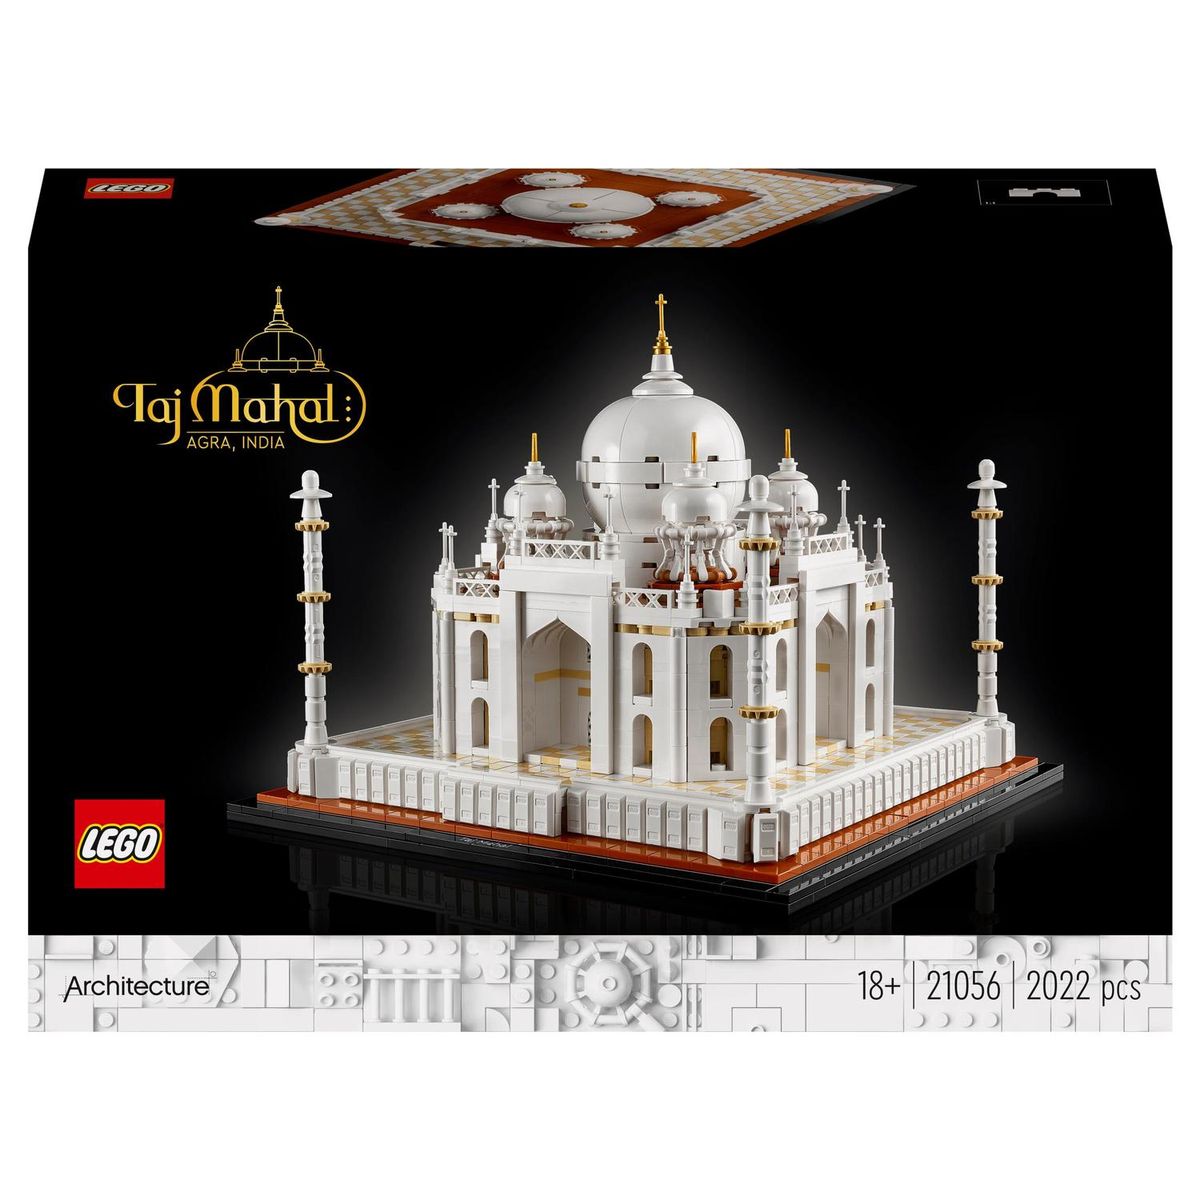  LEGO Architecture London Skyline Collection 21034 Building Set  Model Kit and Gift for Kids and Adults (468 pieces) : Toys & Games